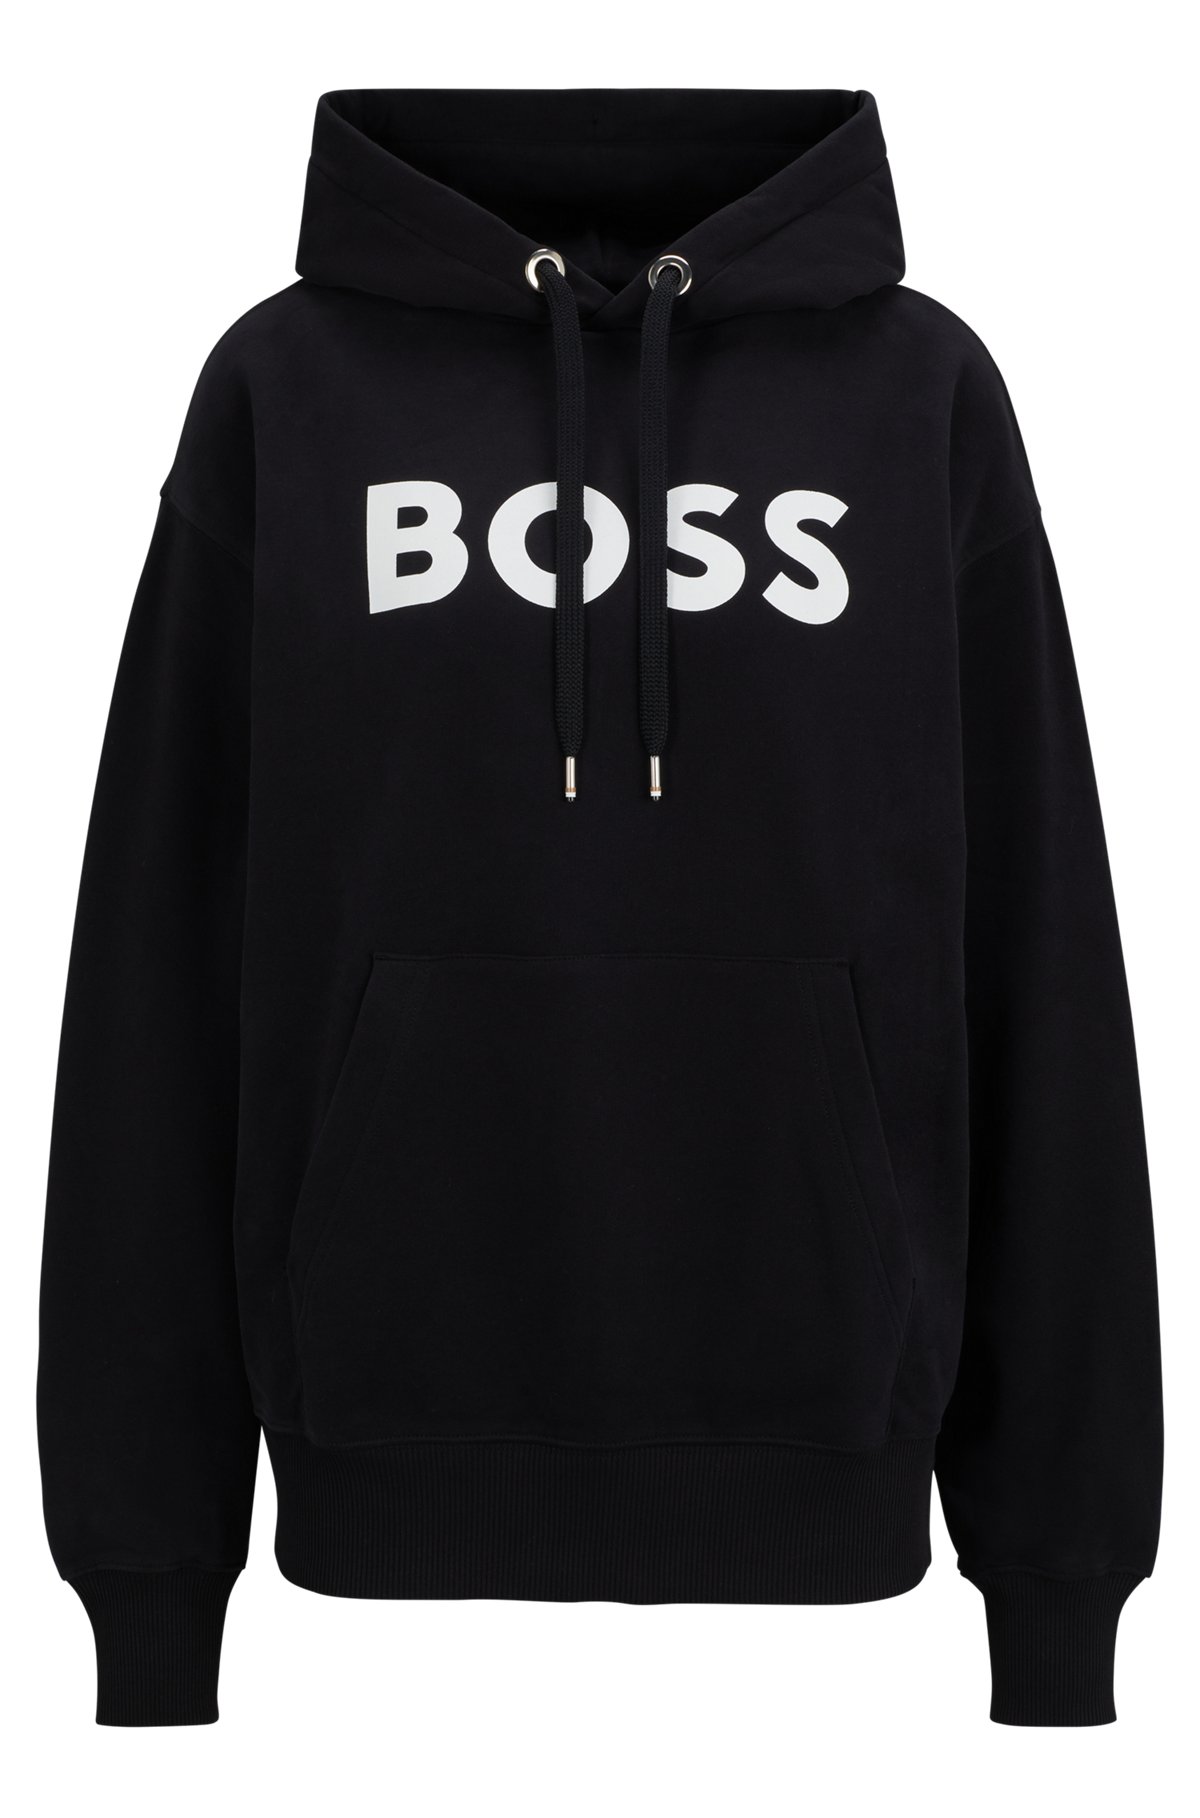 Cotton-blend hoodie with contrast logo, Black